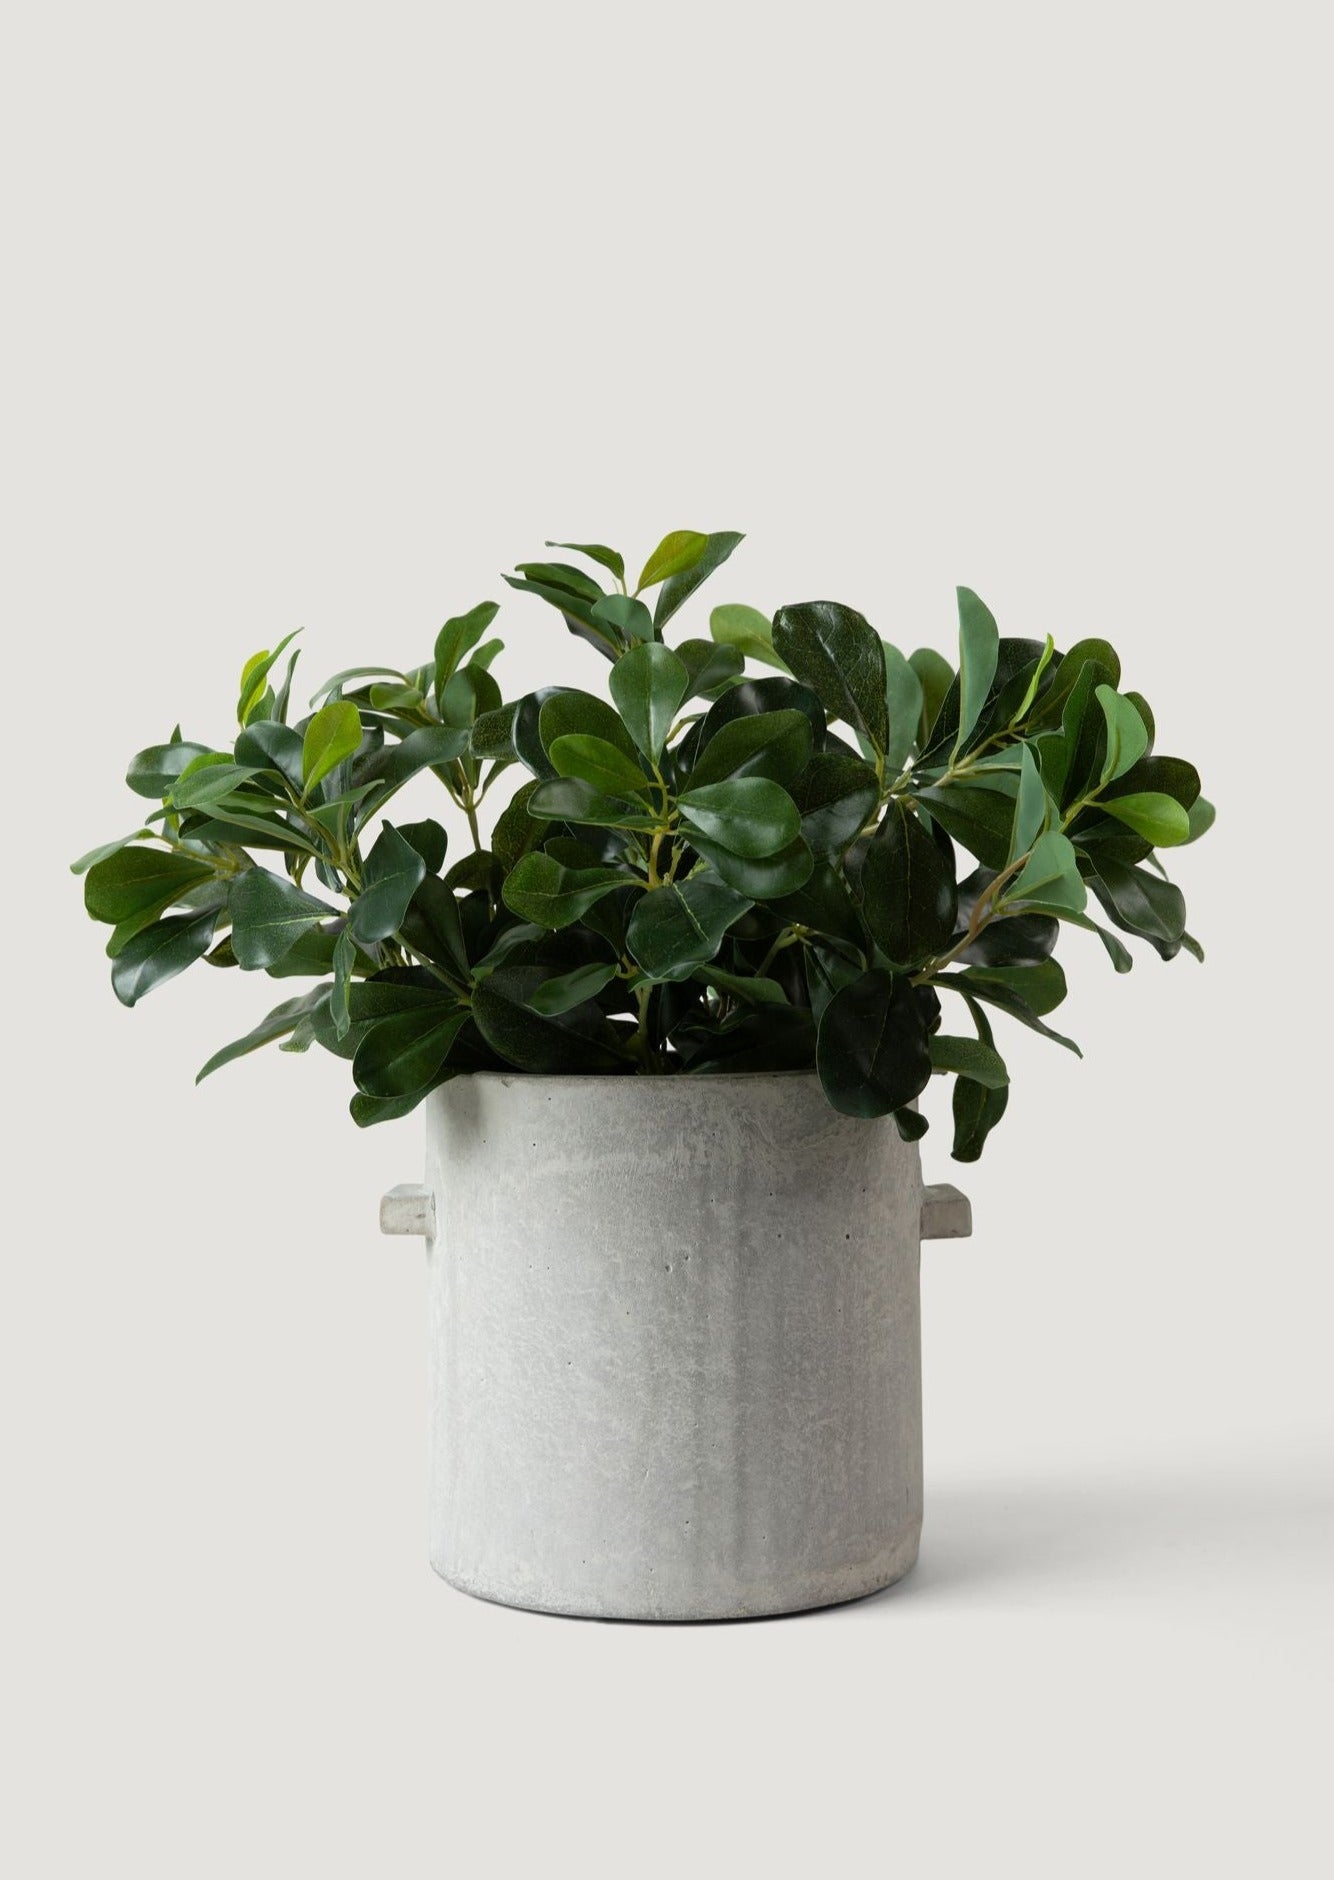 Serax Concrete Pot Styled with Faux Wax Privet Plant